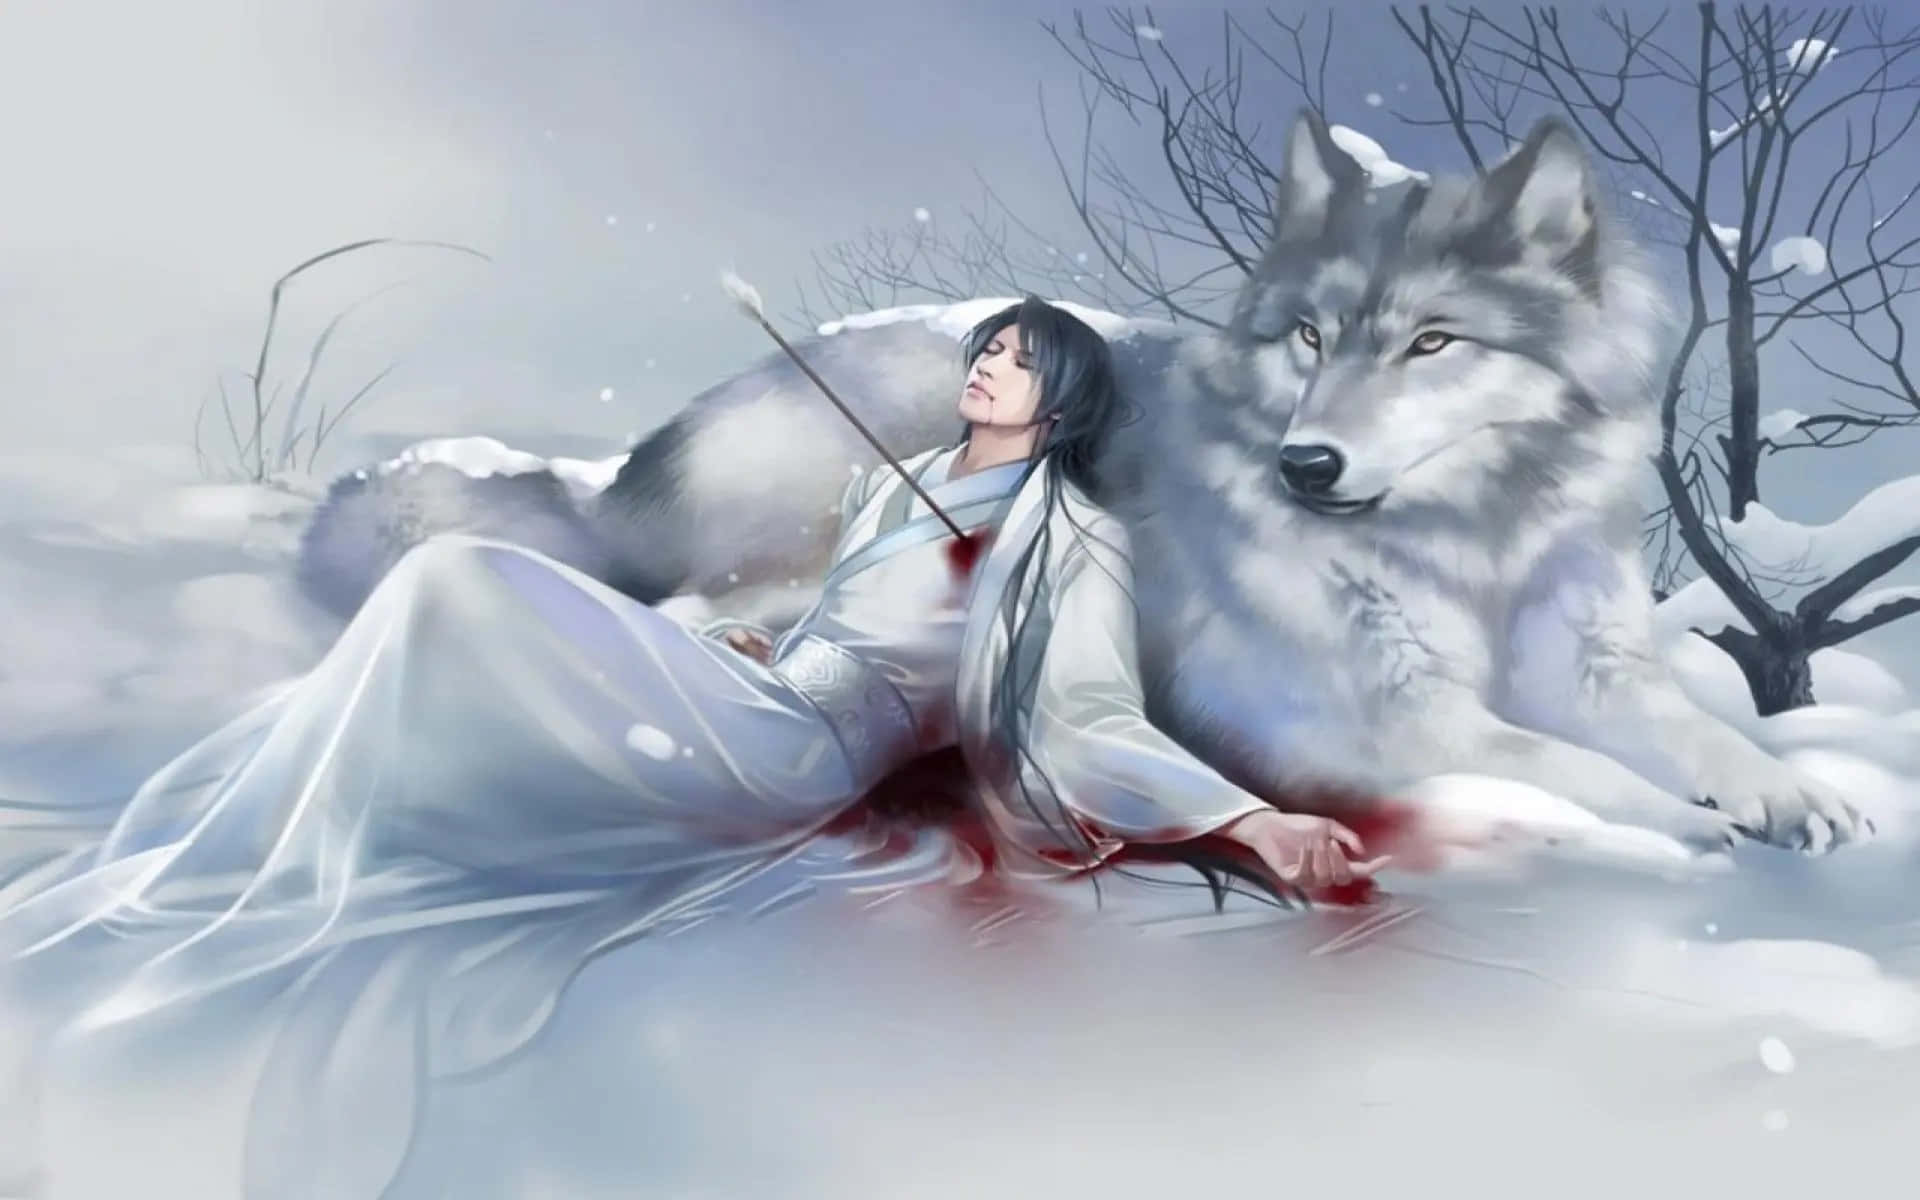 Wallpaper clouds, wolf, sword, katana, sword, clouds, katana, wolf, blue  sky, blue sky, sweet girl, cute girl, anime art, black-haired beauty, anime  art, black-haired beauty images for desktop, section арт - download